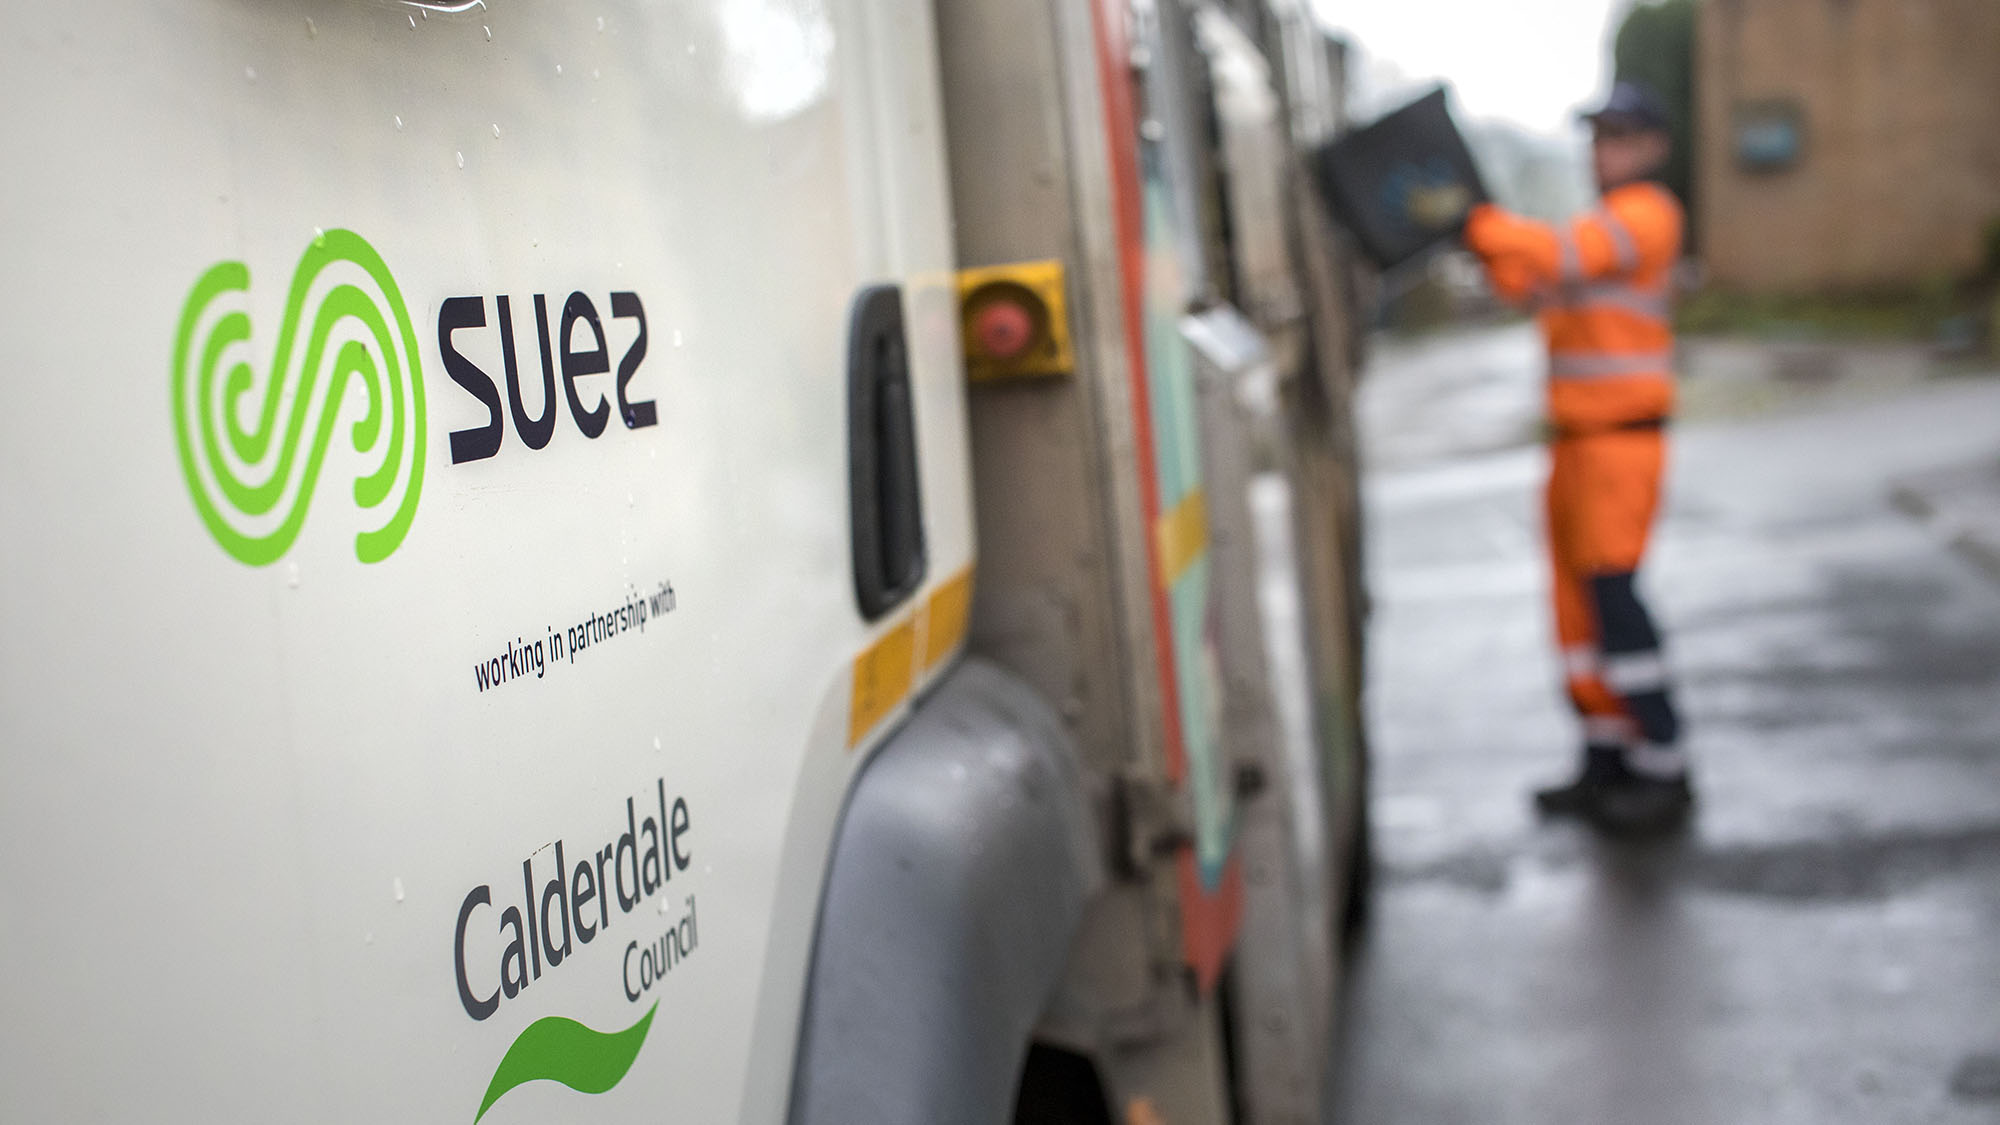 Calderdale municipal collection contract